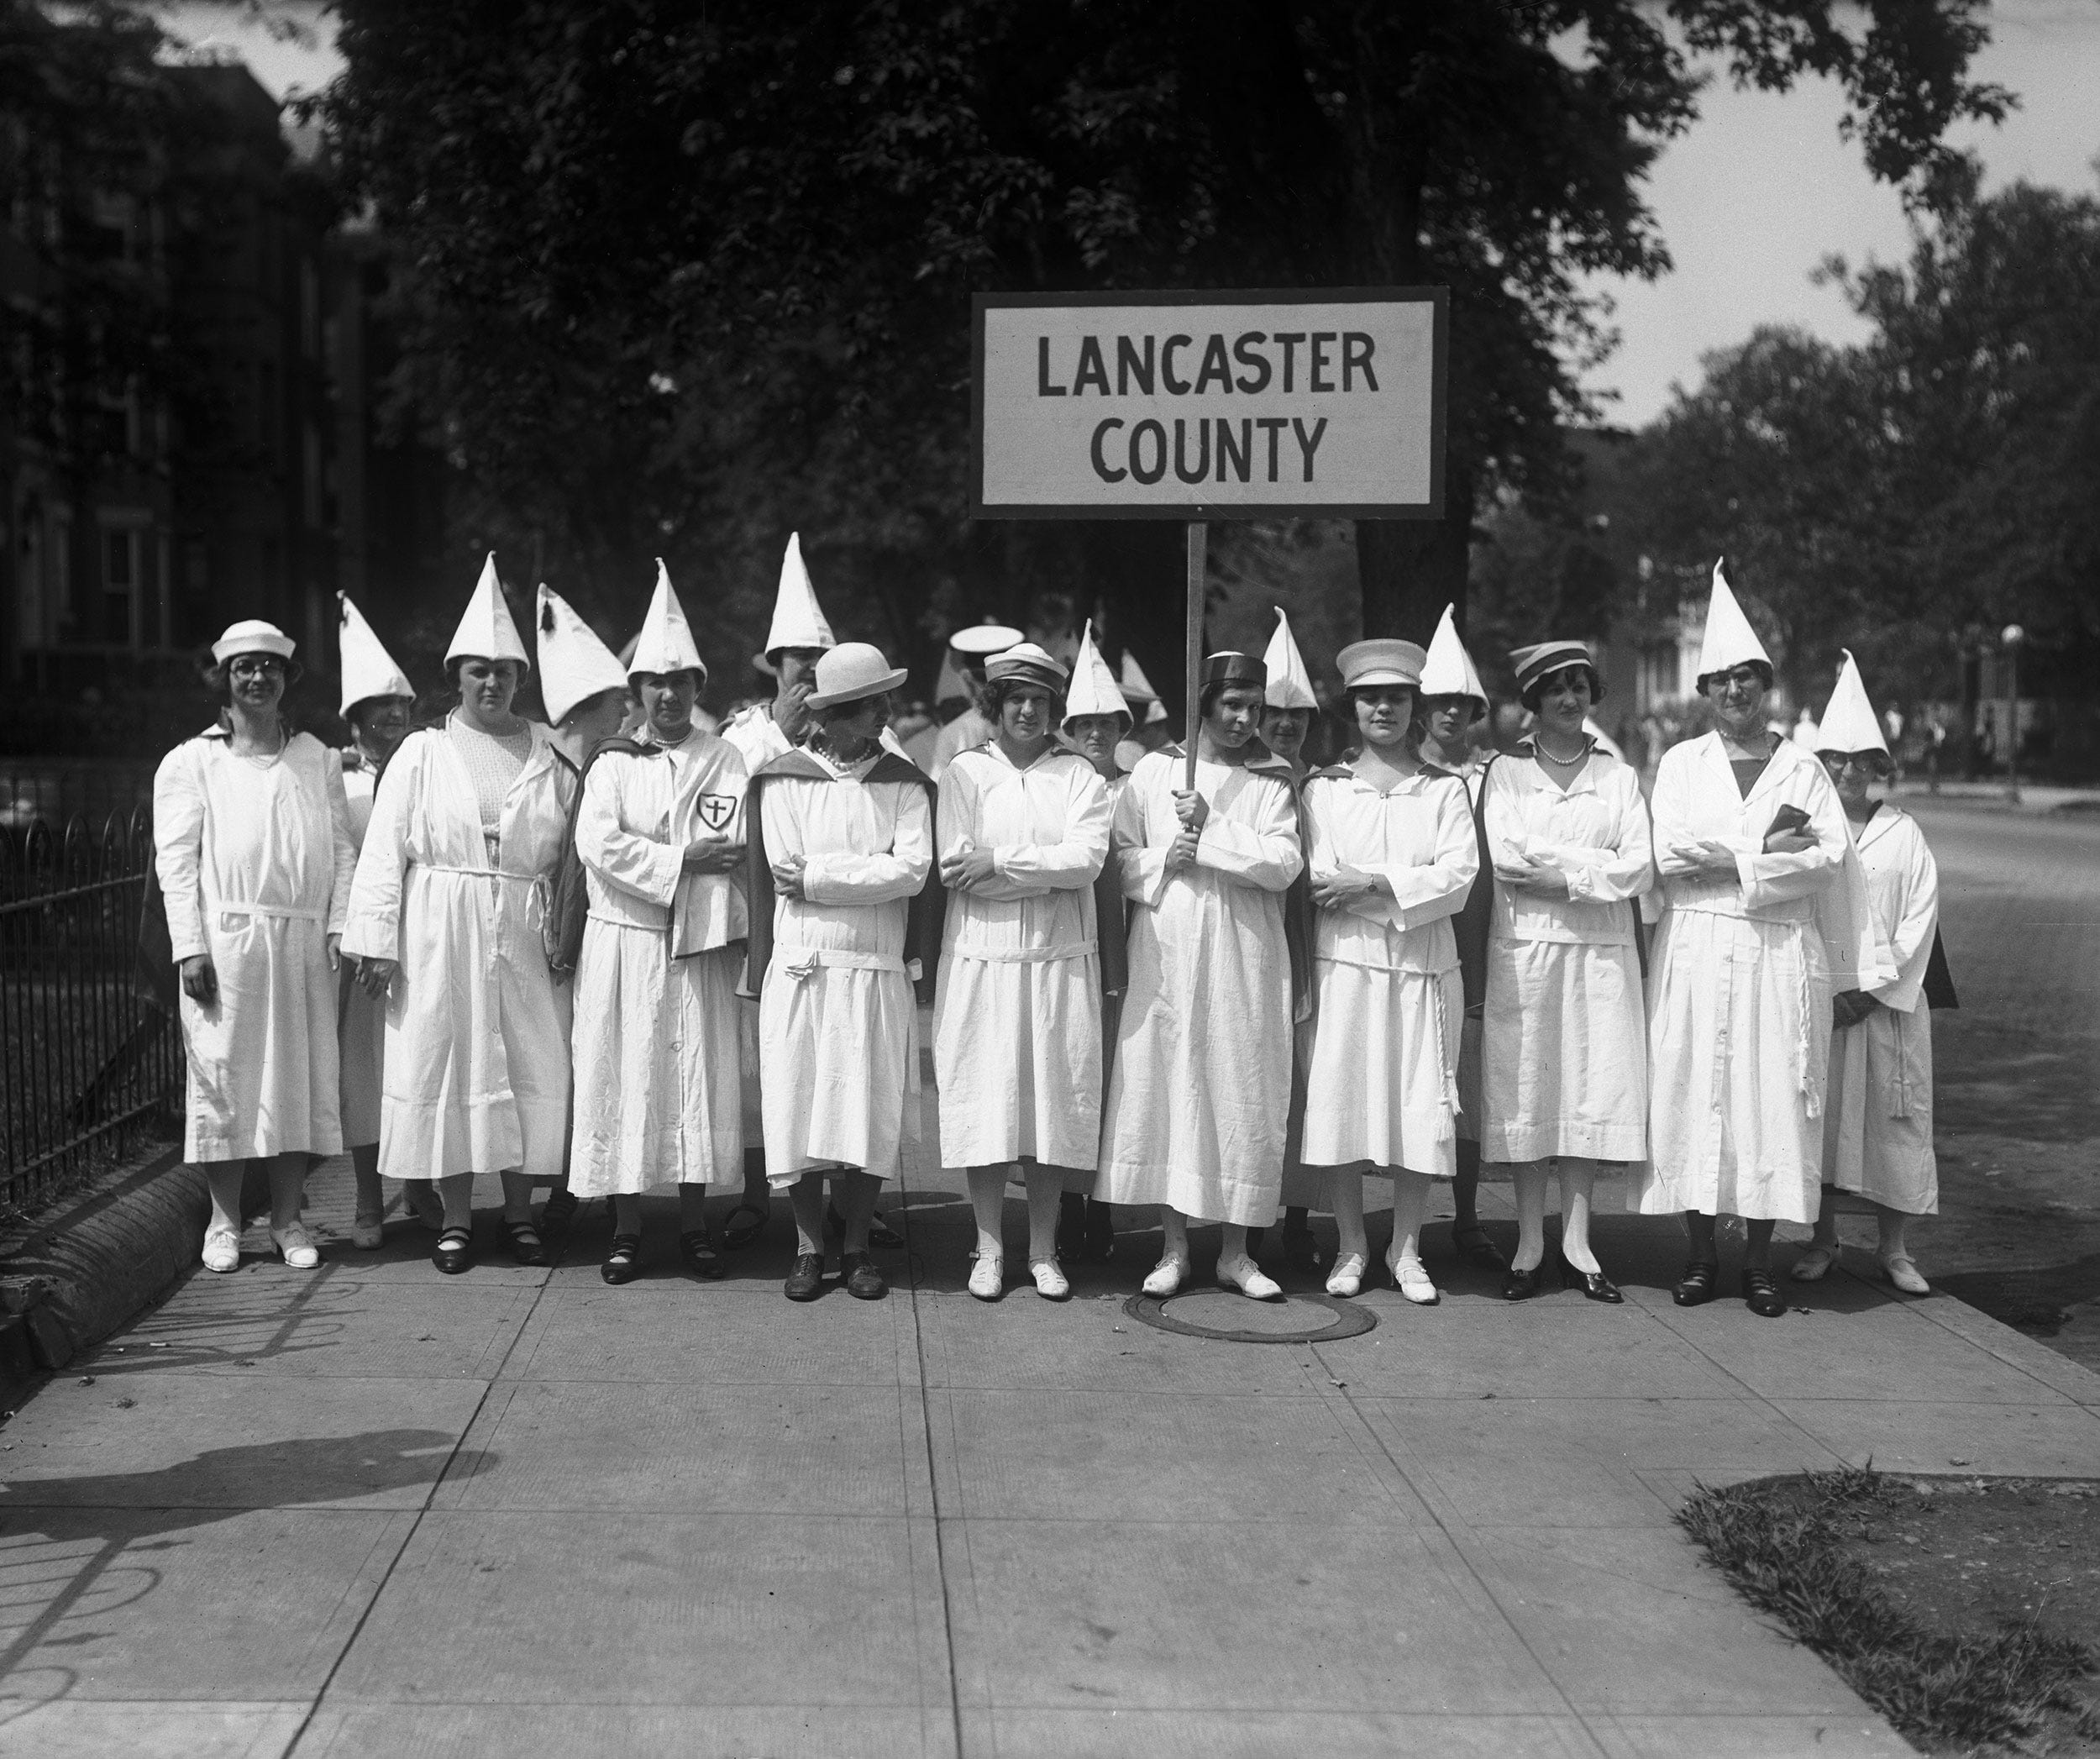 The Kkk Started A Branch Just For Women In The 1920s And Half A